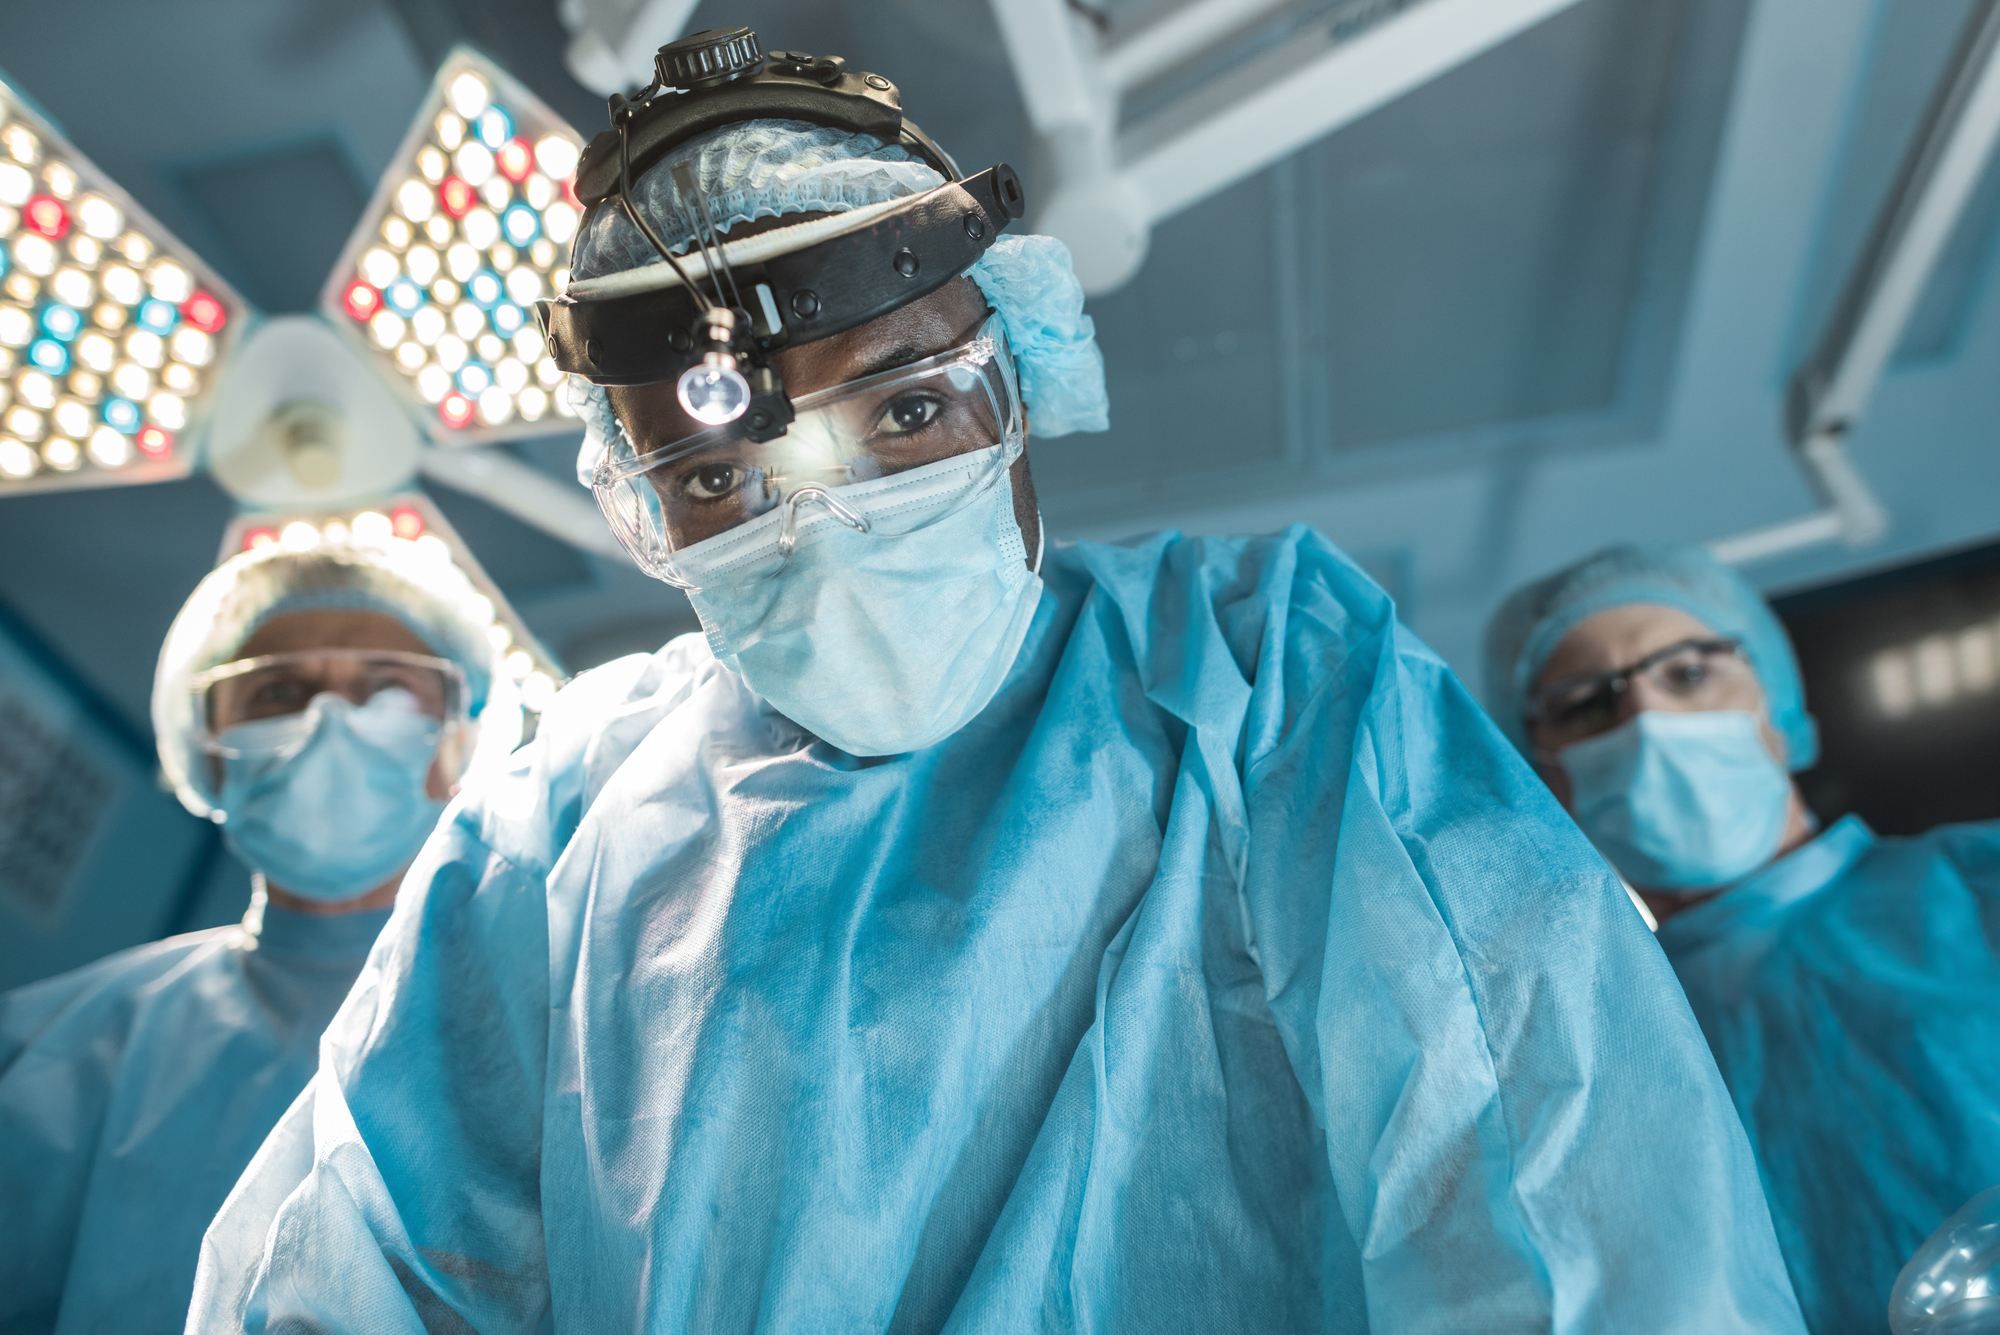 Surgeon leans over patient in operating room